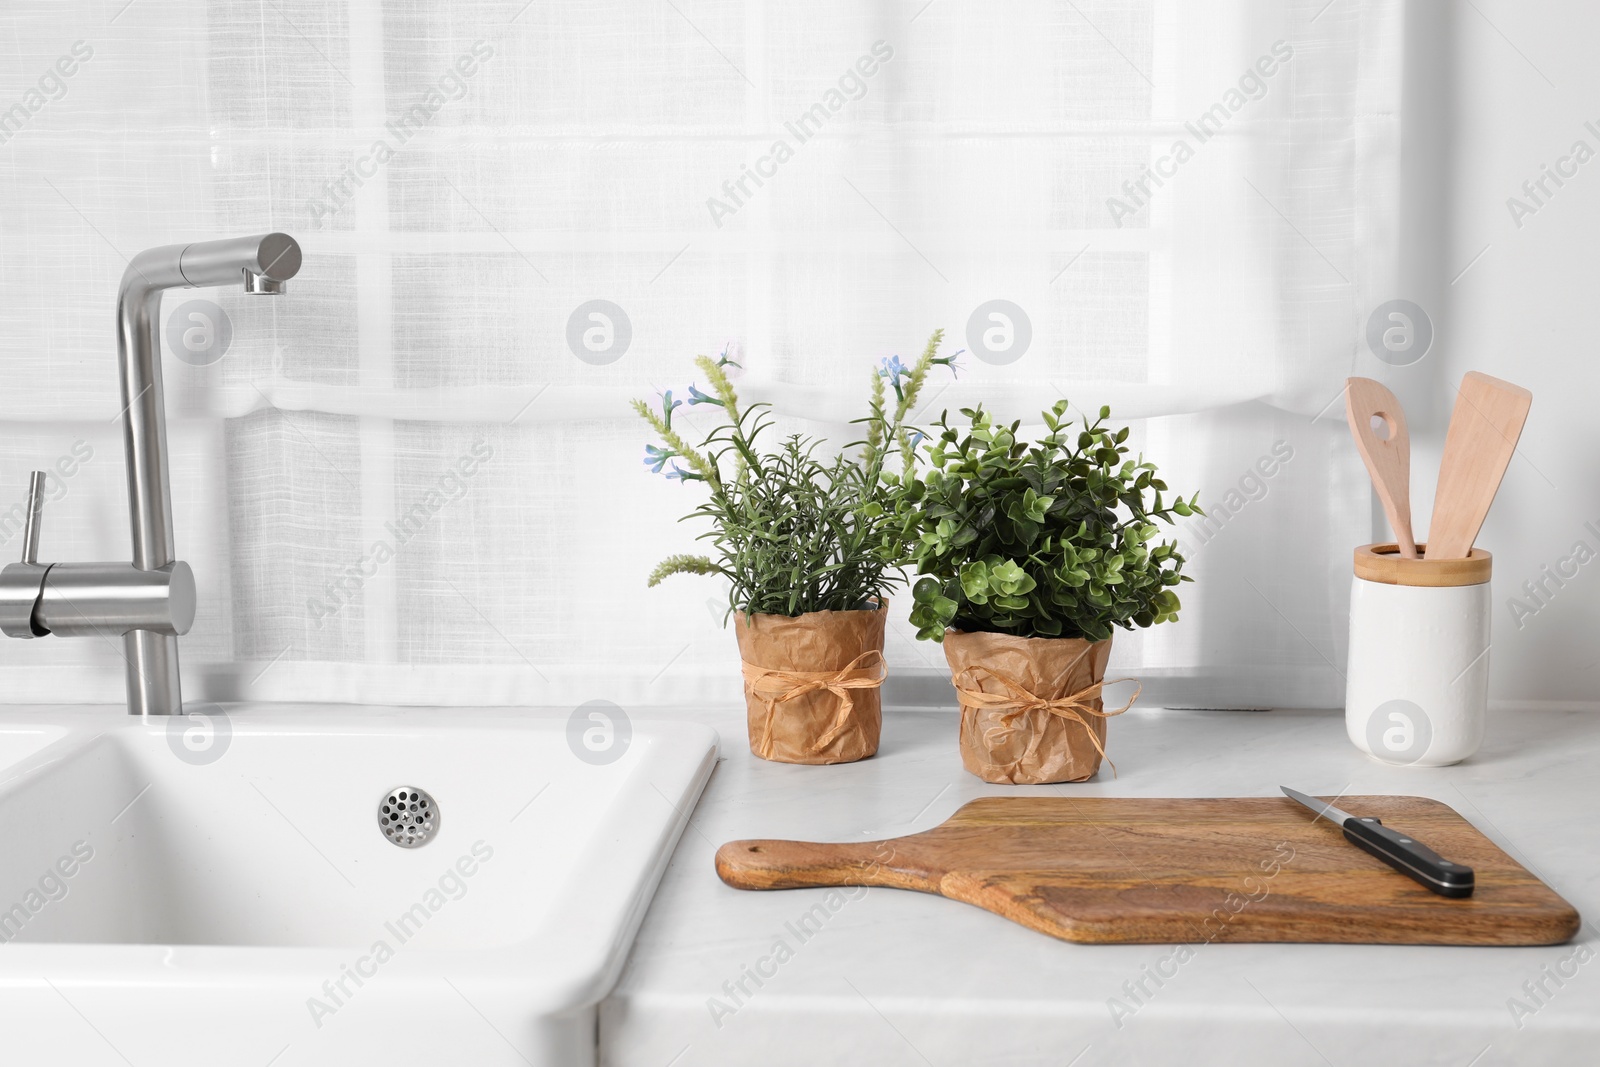 Photo of Artificial potted herbs, board and knife on white marble countertop in kitchen. Home decor